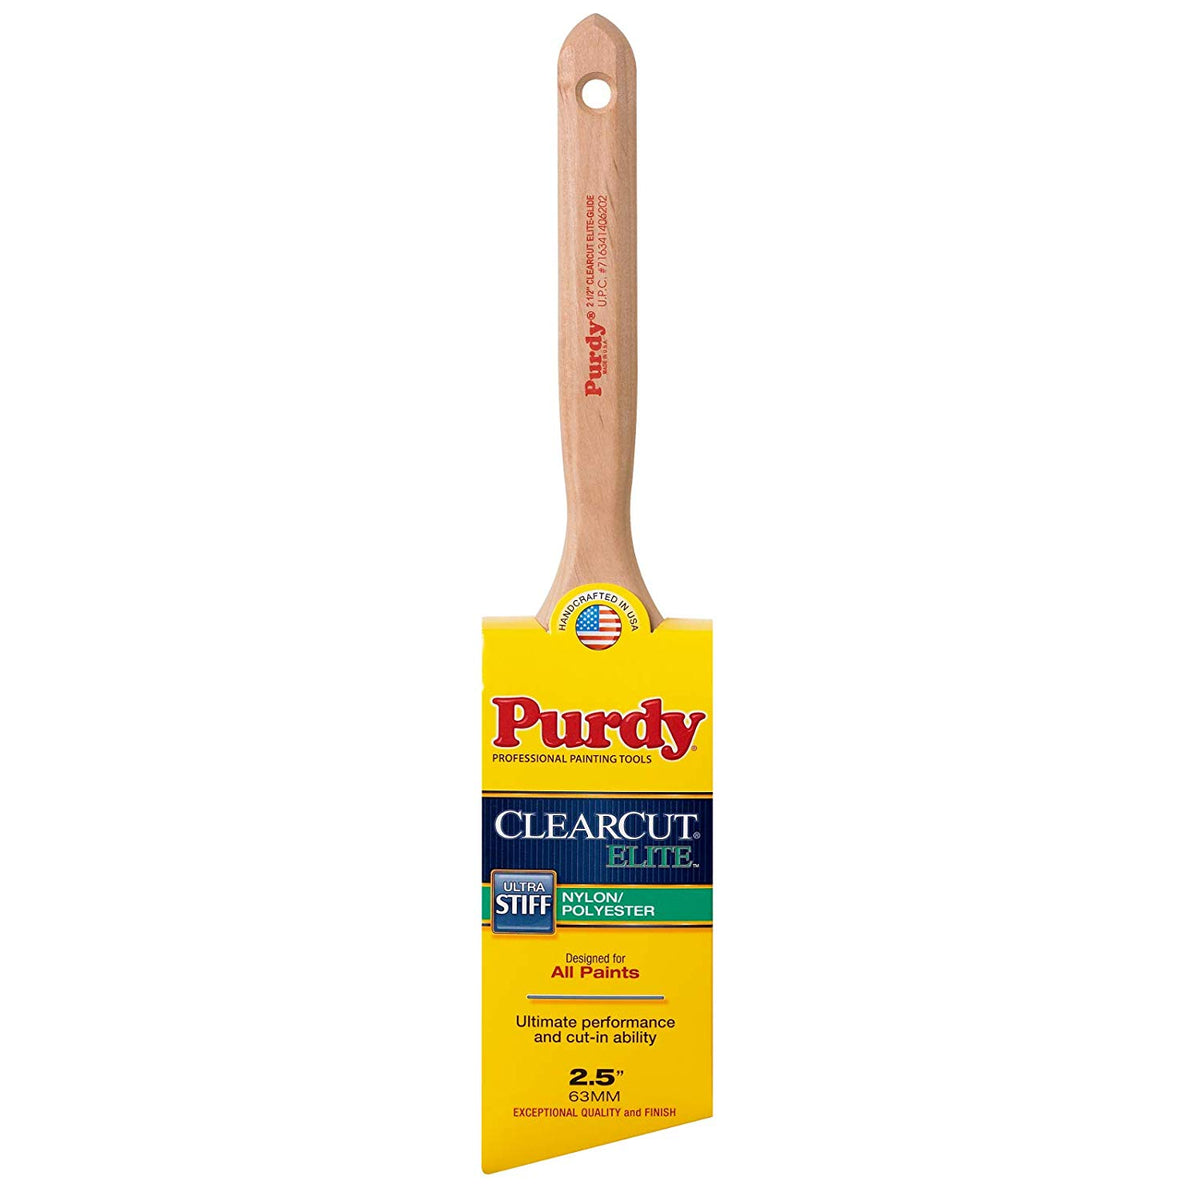 Purdy 144152825 Clearcut Elite Glide Brush, 2.5", 5/8" Thickness